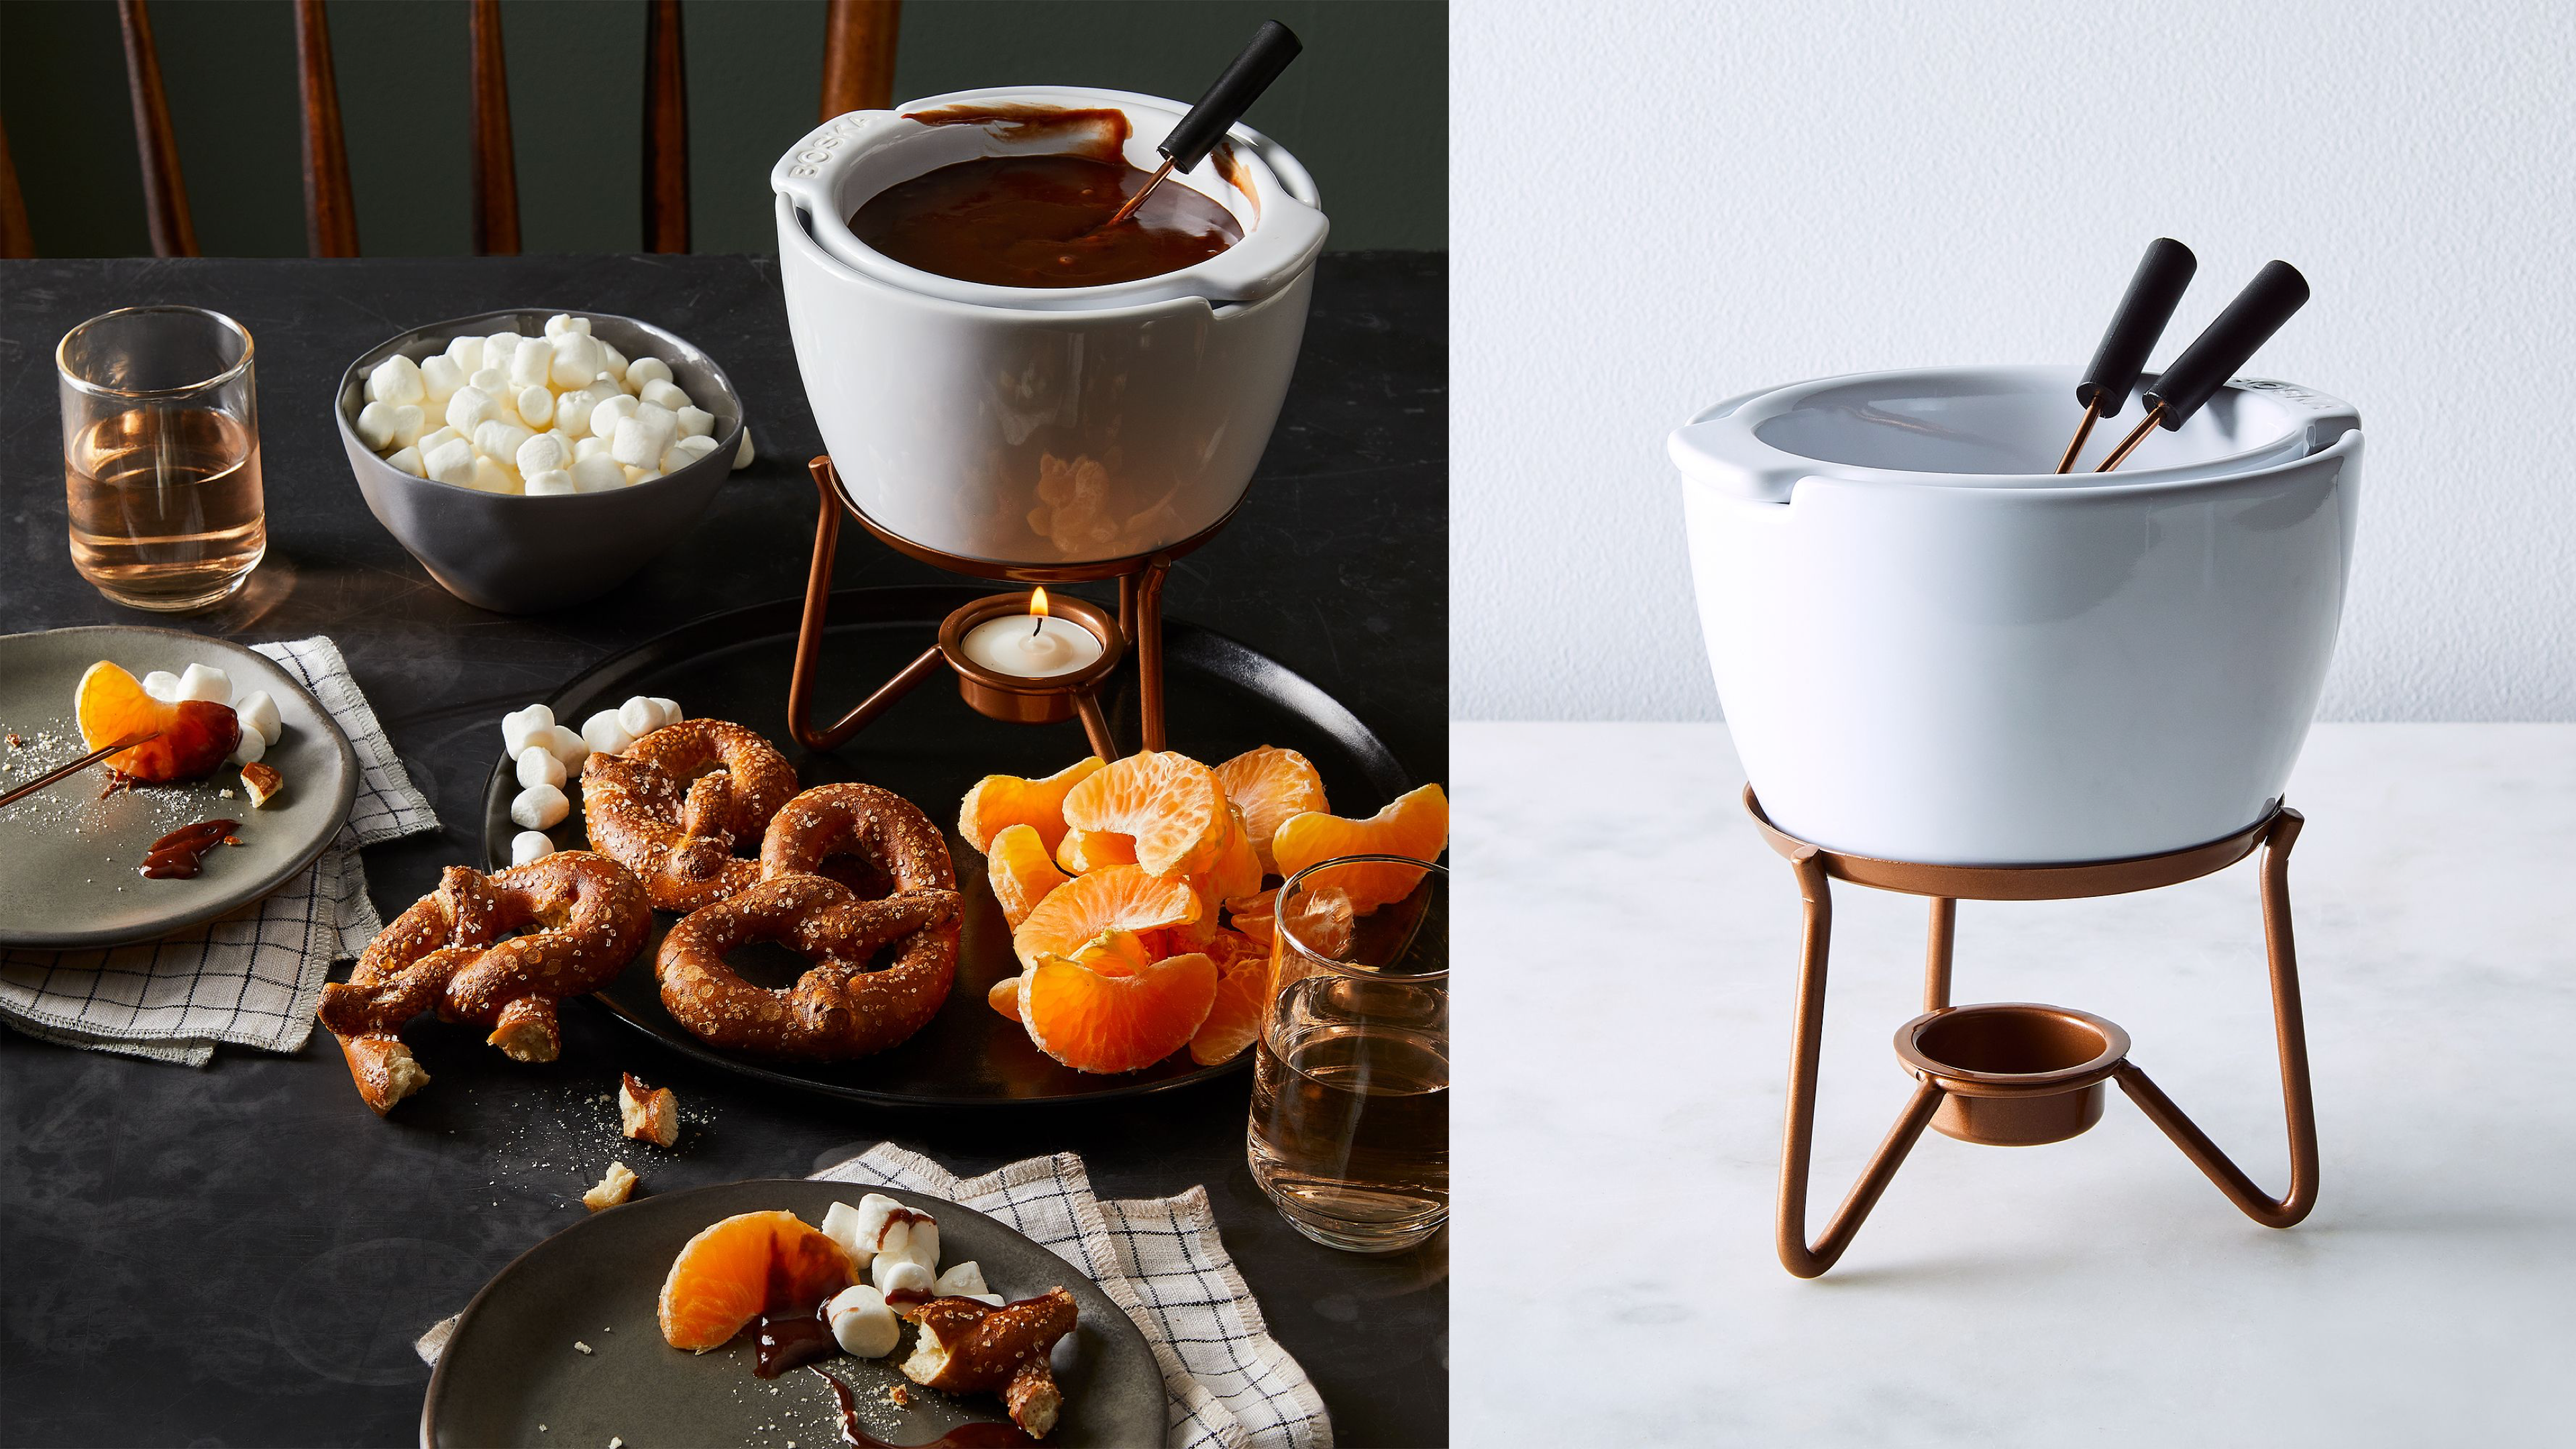 fondue pot with sticks for dipping sweets and fruit